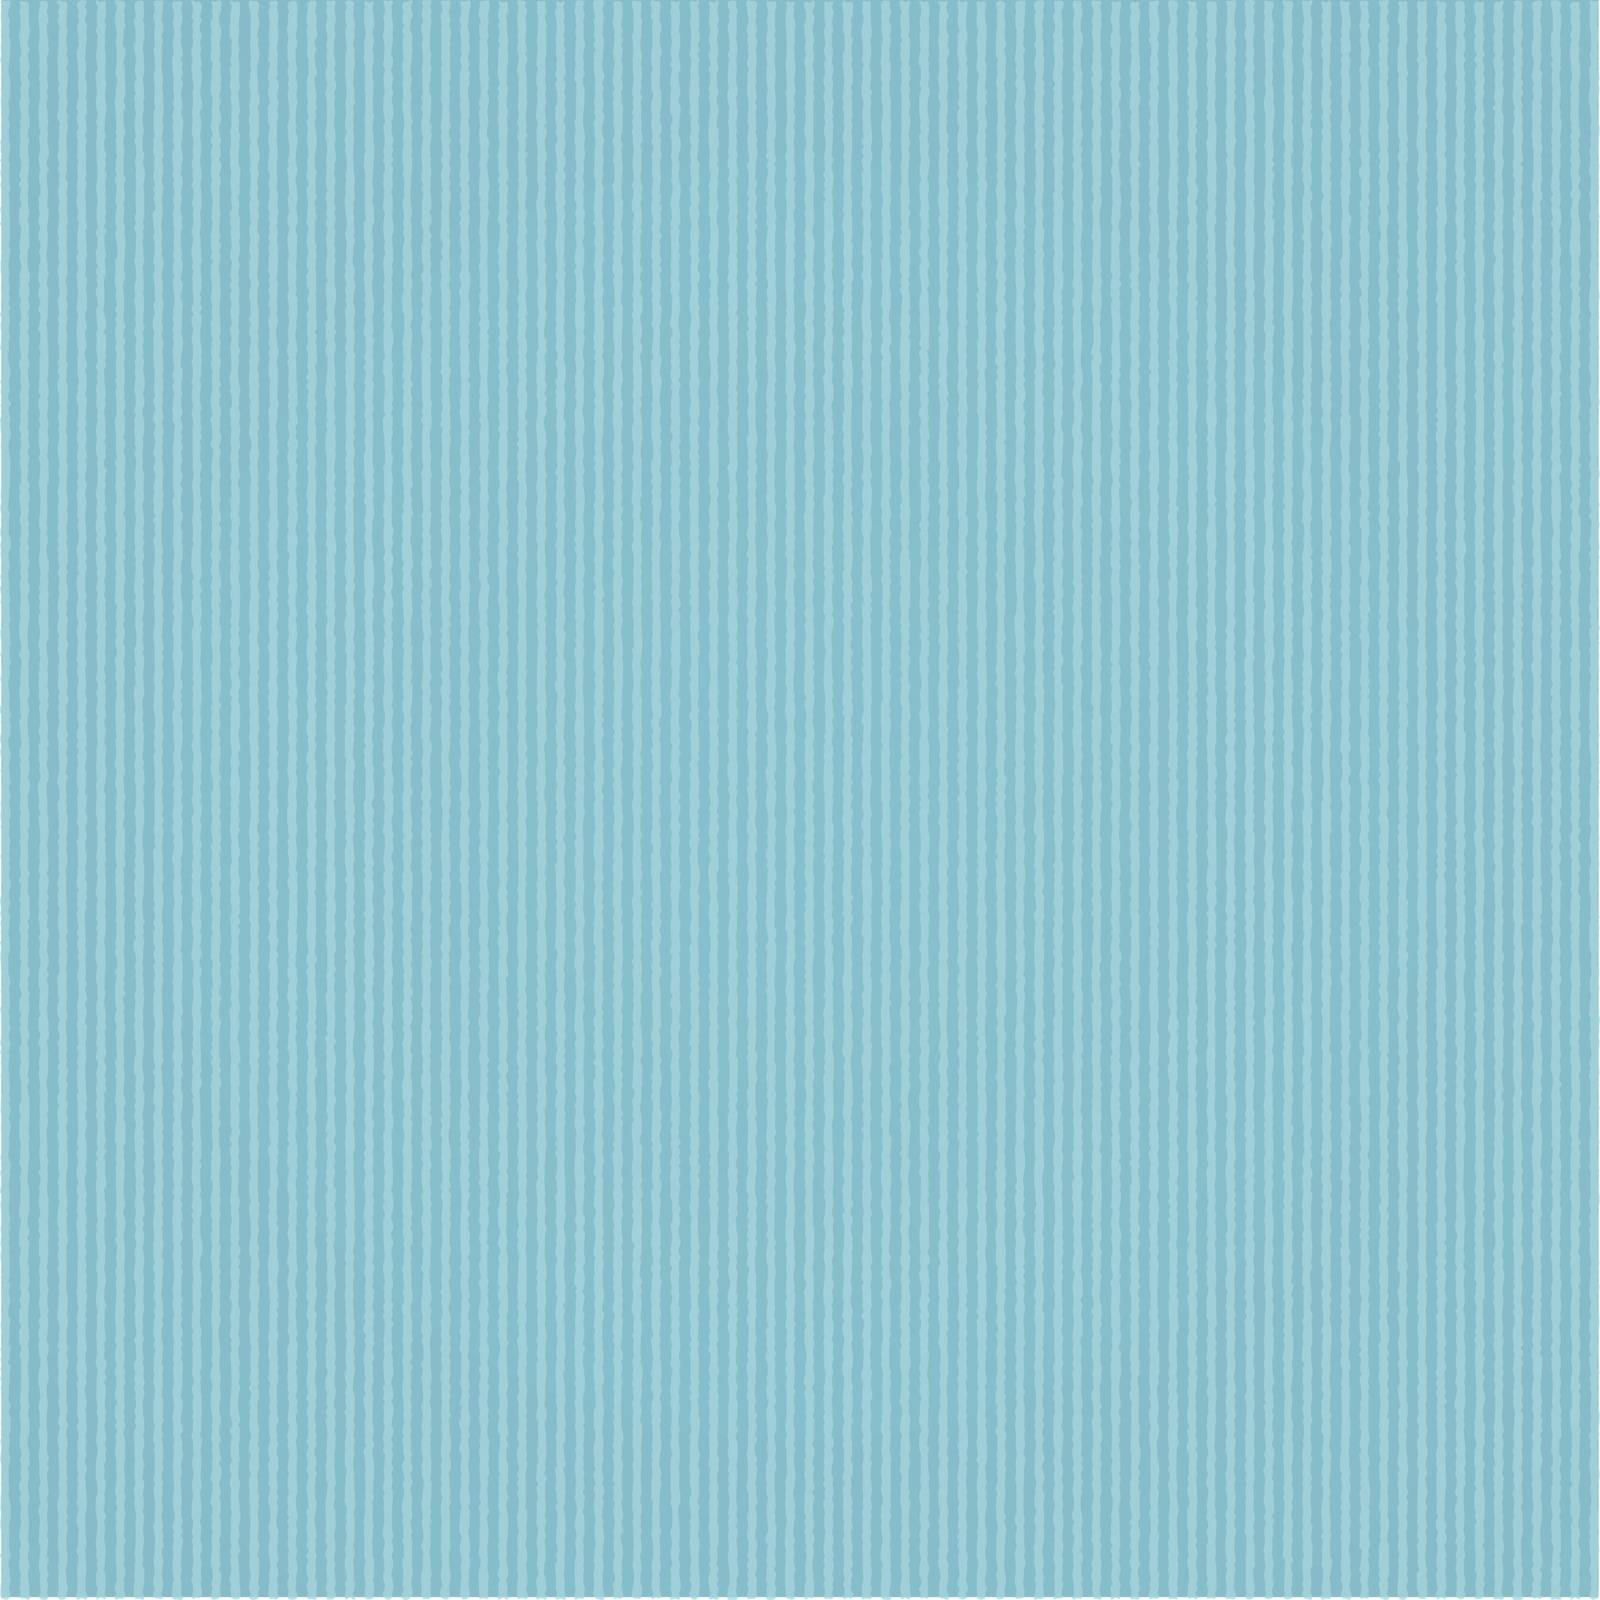 empty corrugated cardboard background with blue color